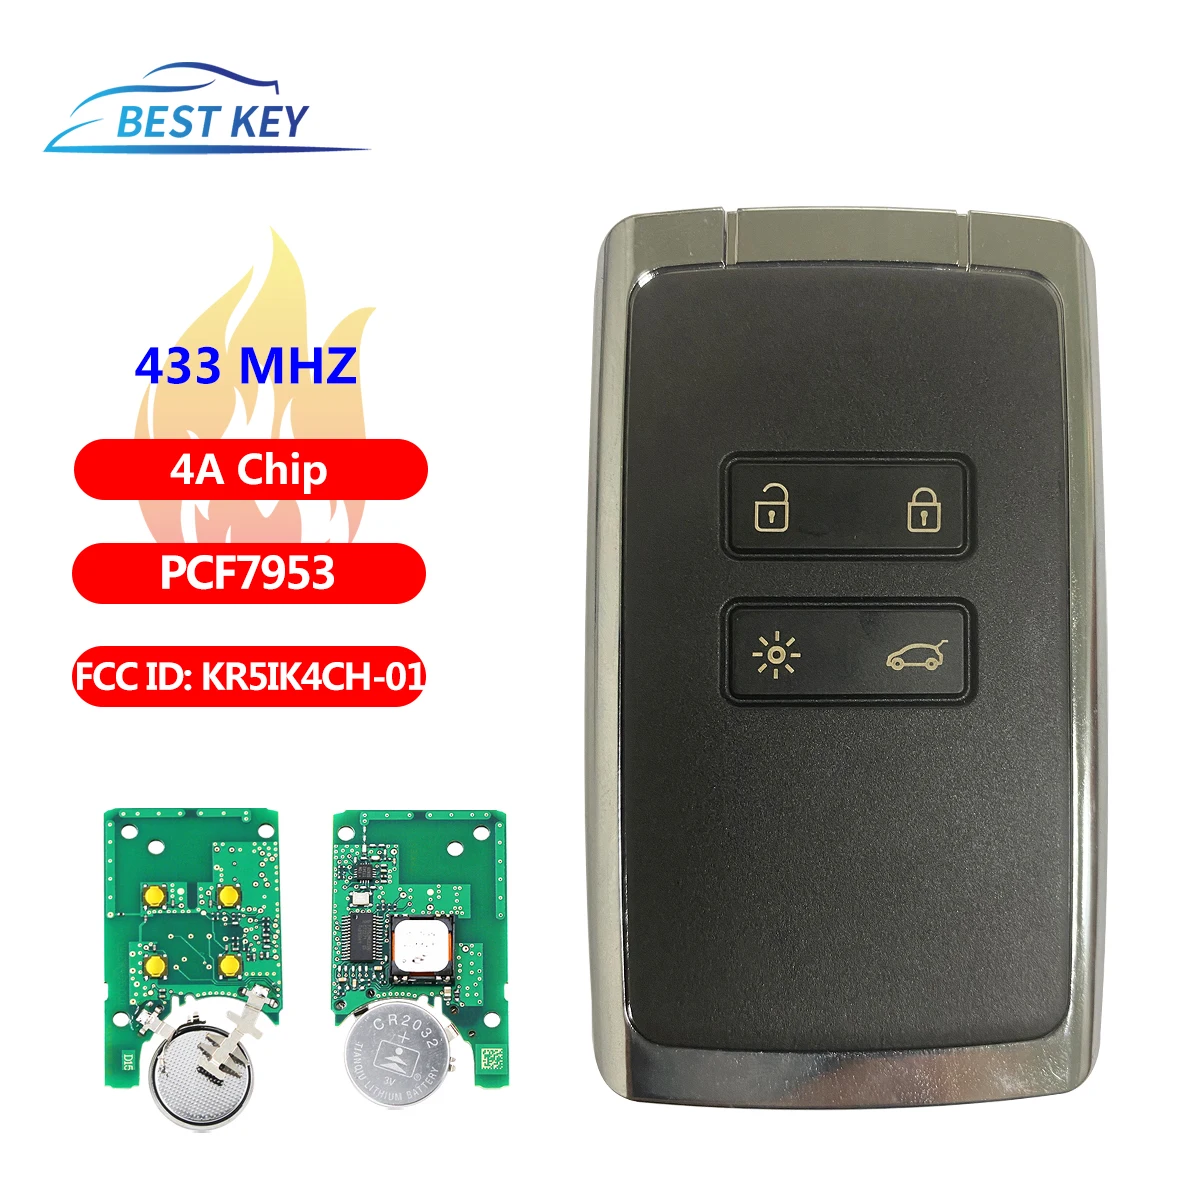 BEST KEY 4 Buttons Smart Remote KeyCar Alarm For Renault Megane 4 Keyless Go / Entry Car Key  434mhz Hitag AES PCF7953M 4A Chip